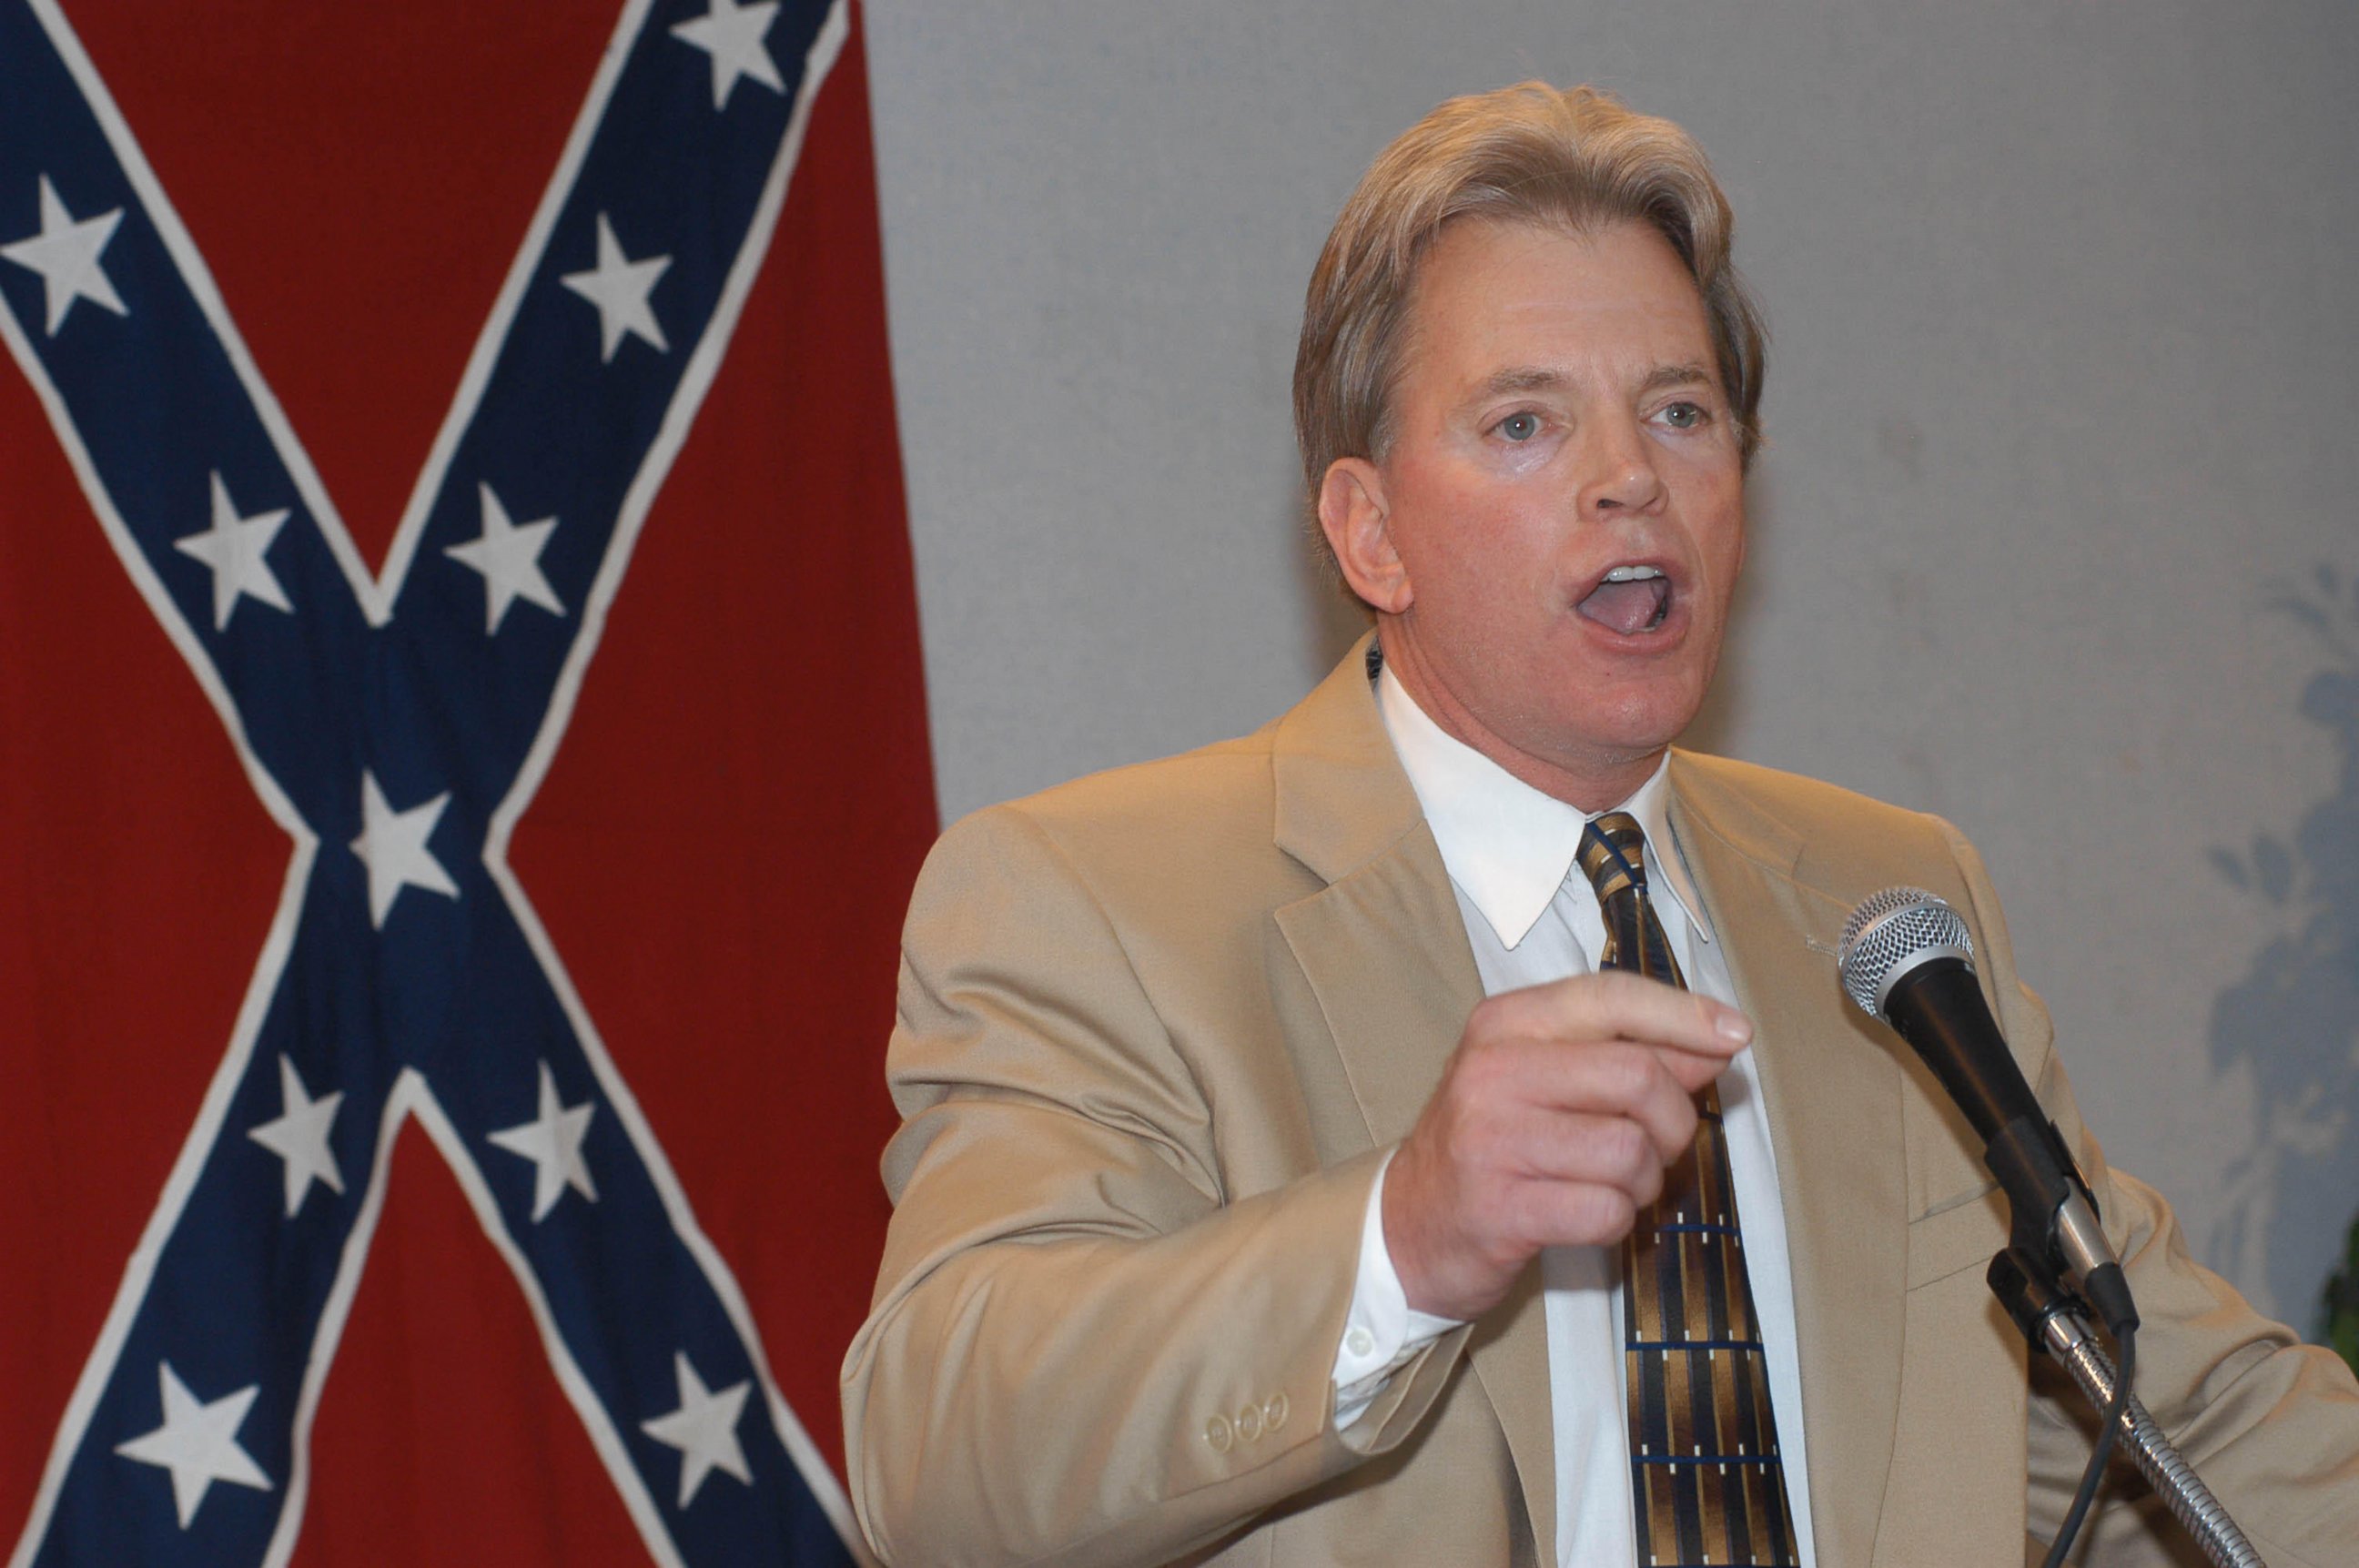 PHOTO: Former Ku Klux Klan leader David Duke speaks to supporters at a reception, May 29, 2004, in Kenner, Louisiana. 